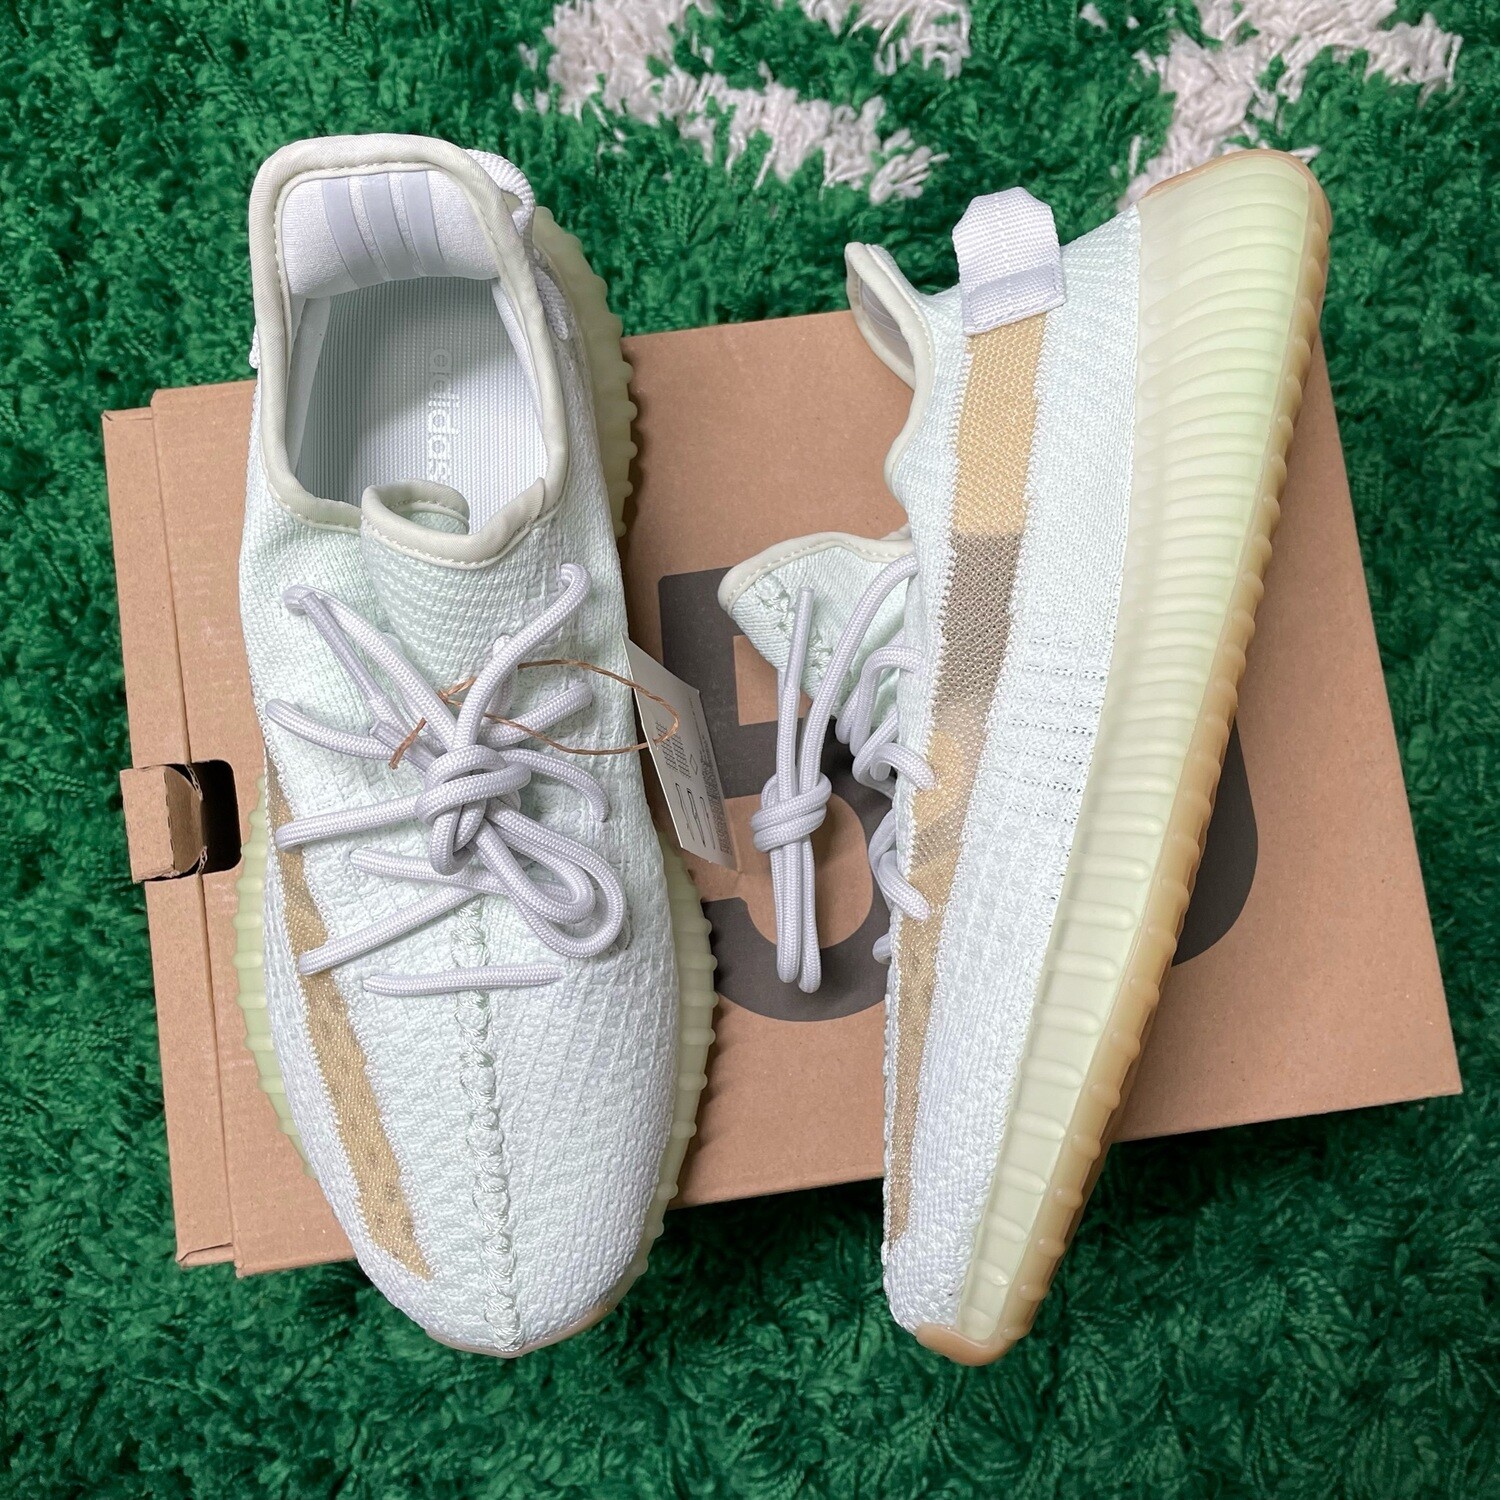 adidas Yeezy Boost 350 V2 Hyperspace Size 8M/9.5W